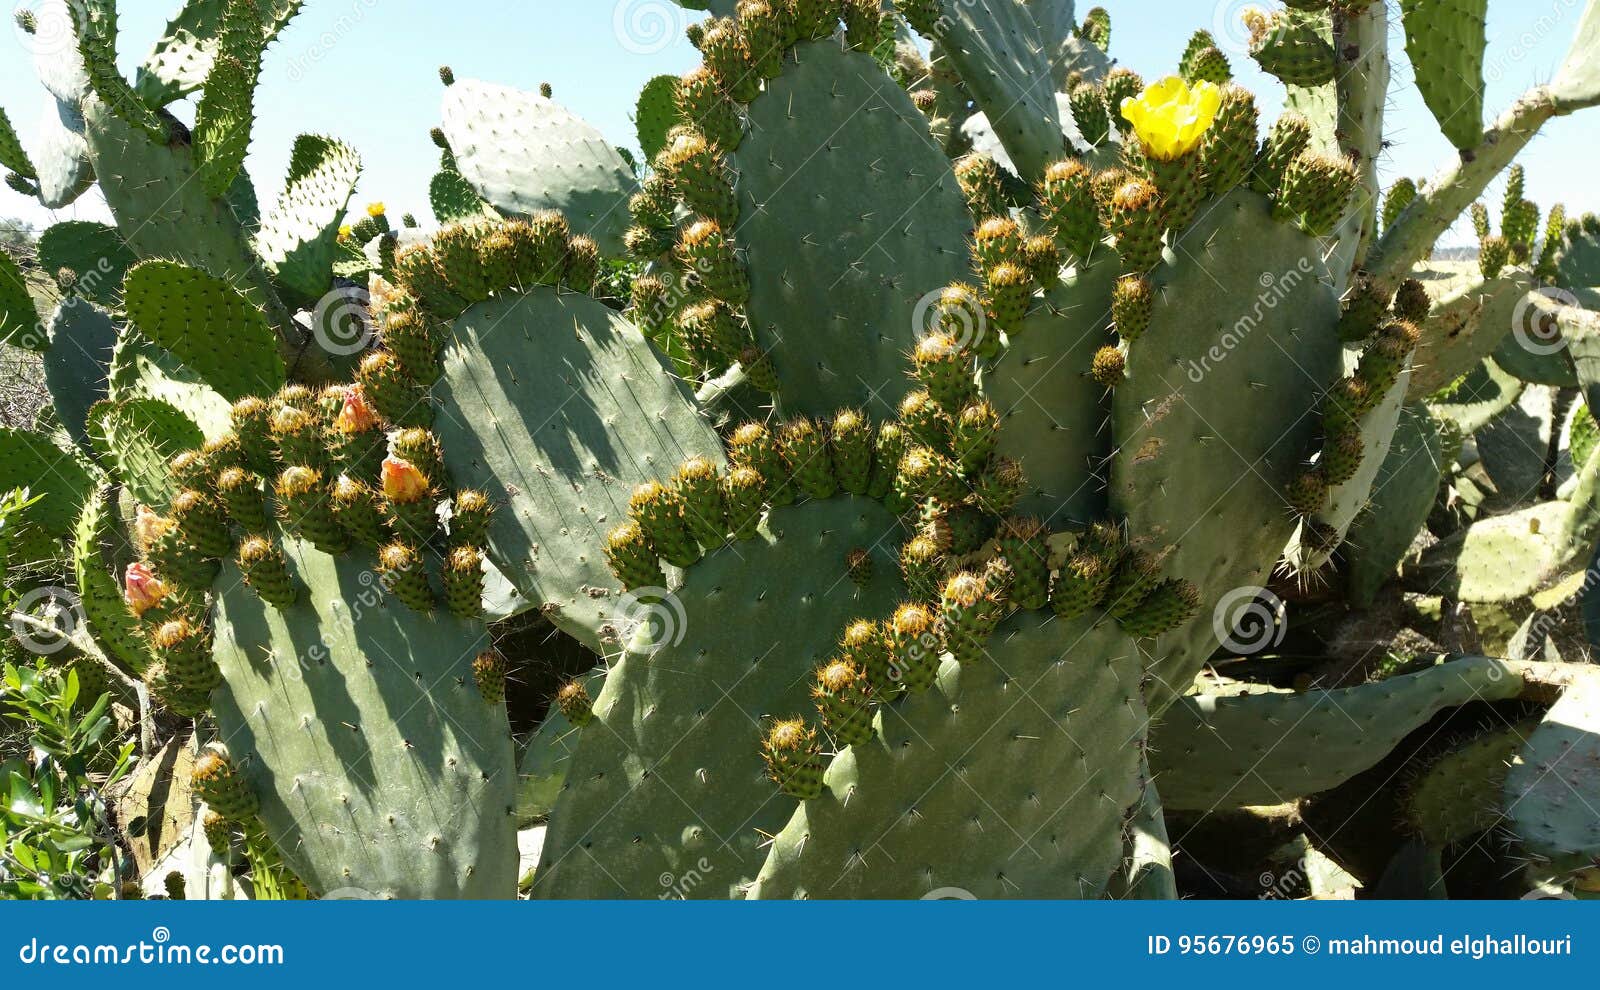 cactus morocco indian fig opuntia barbary fig